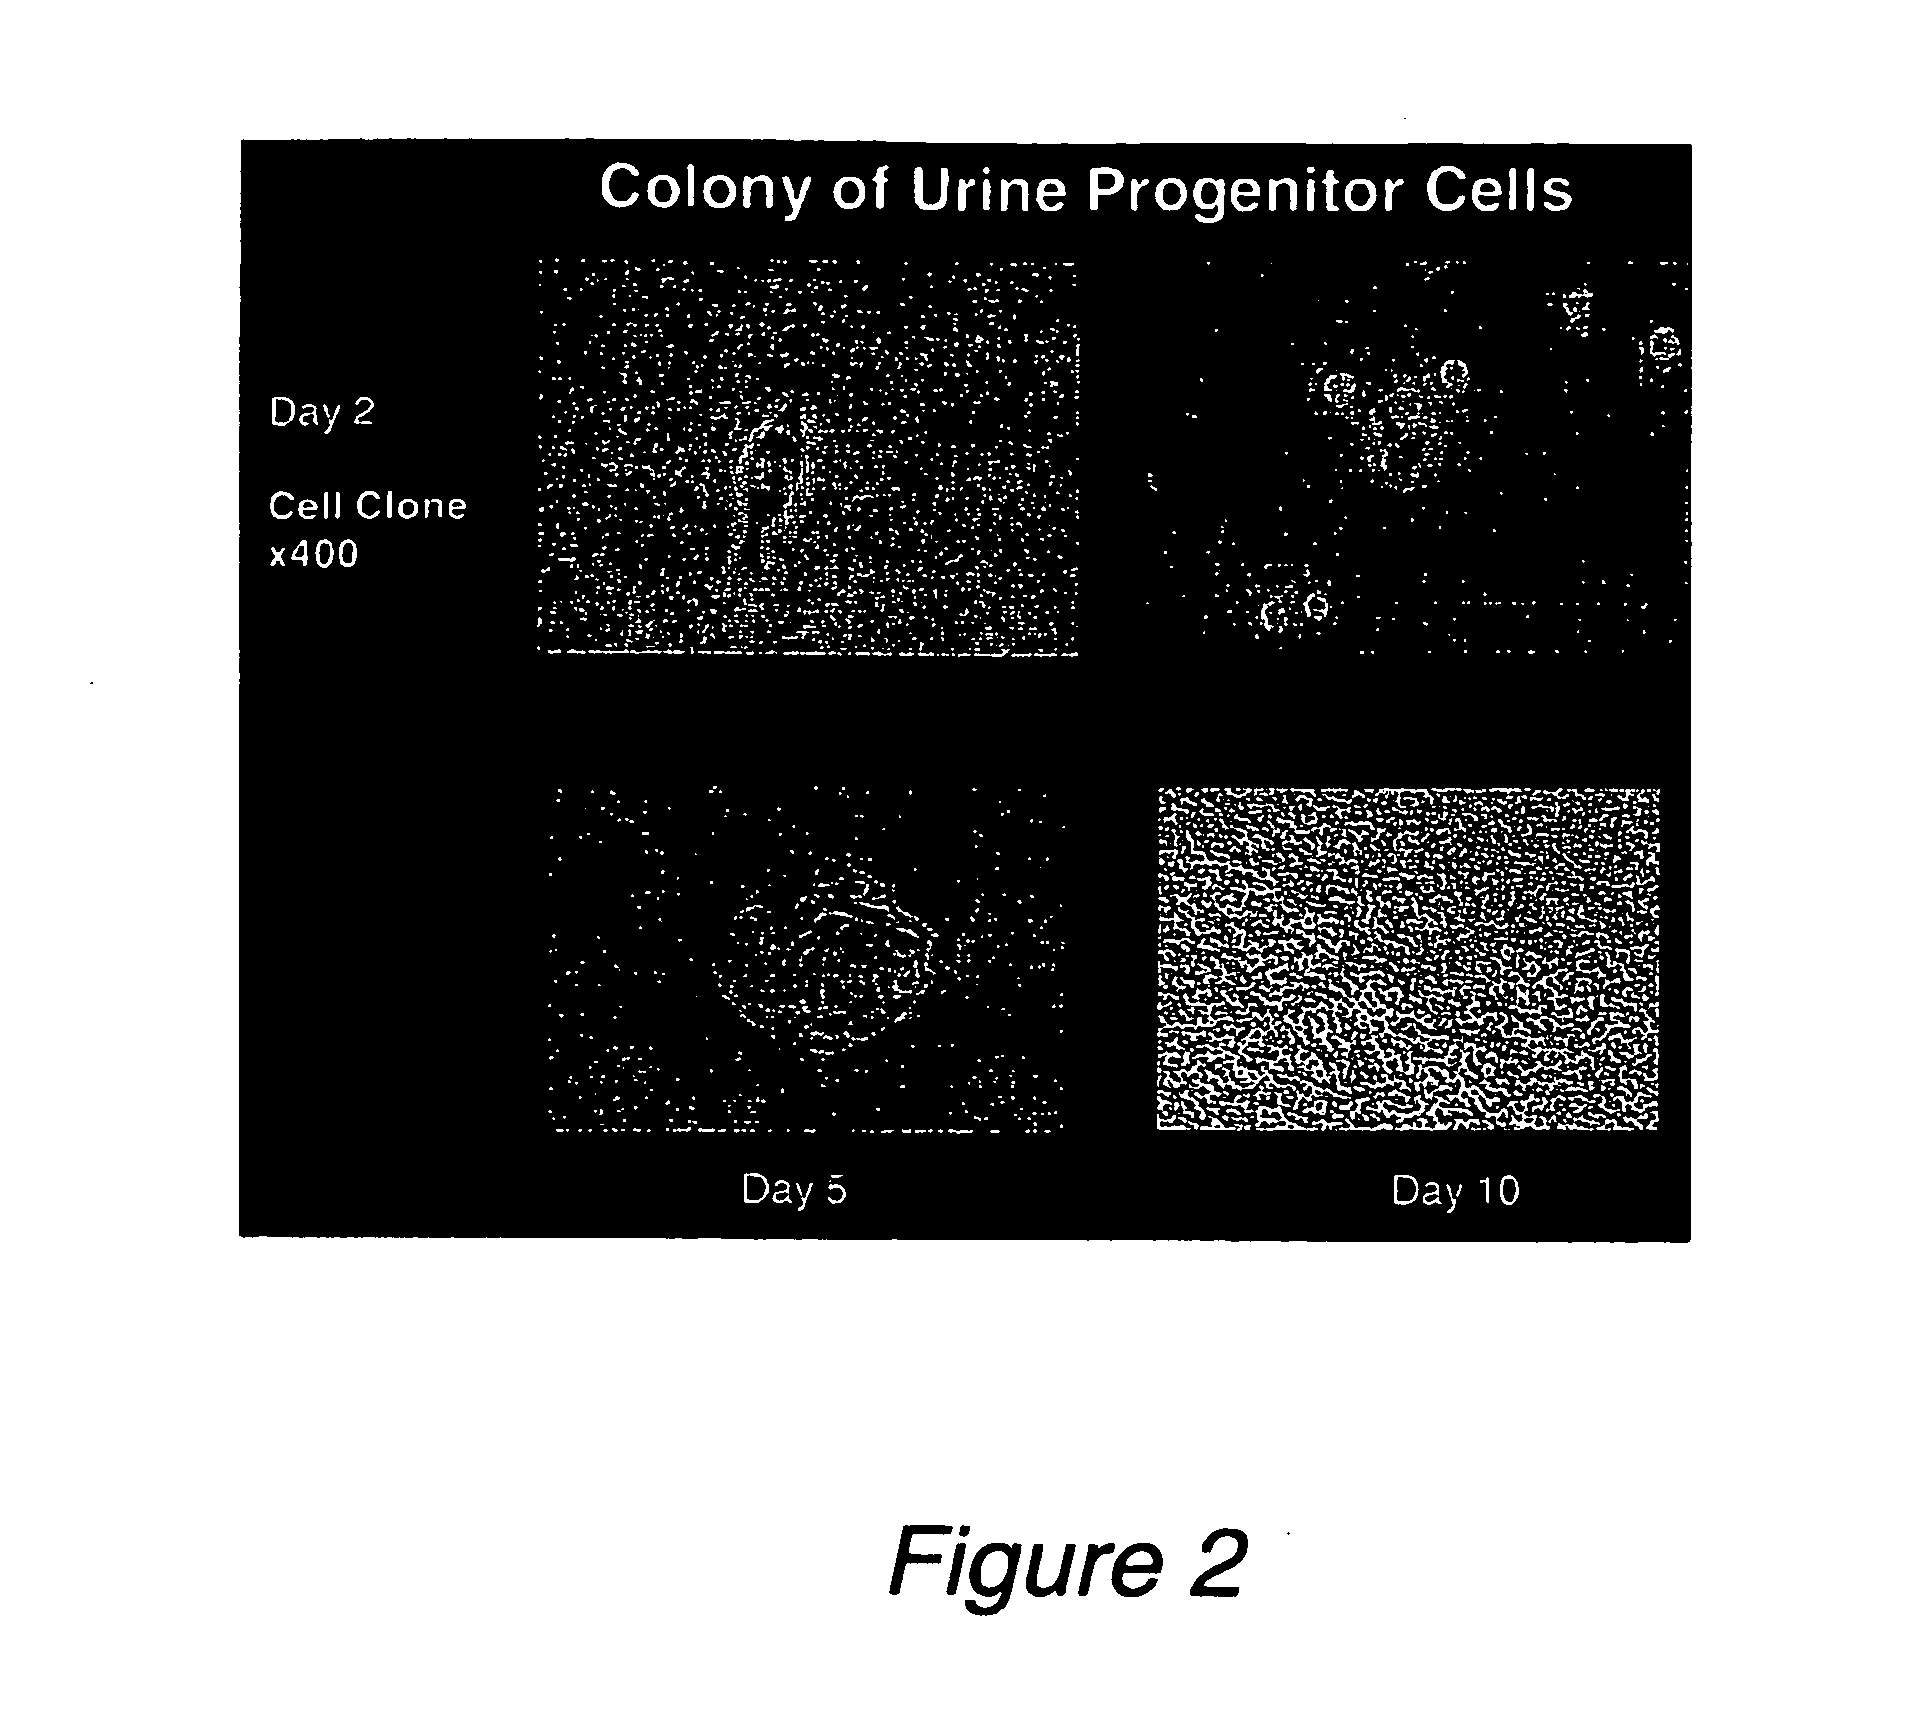 Progenitor cells from urine and methods for using the same